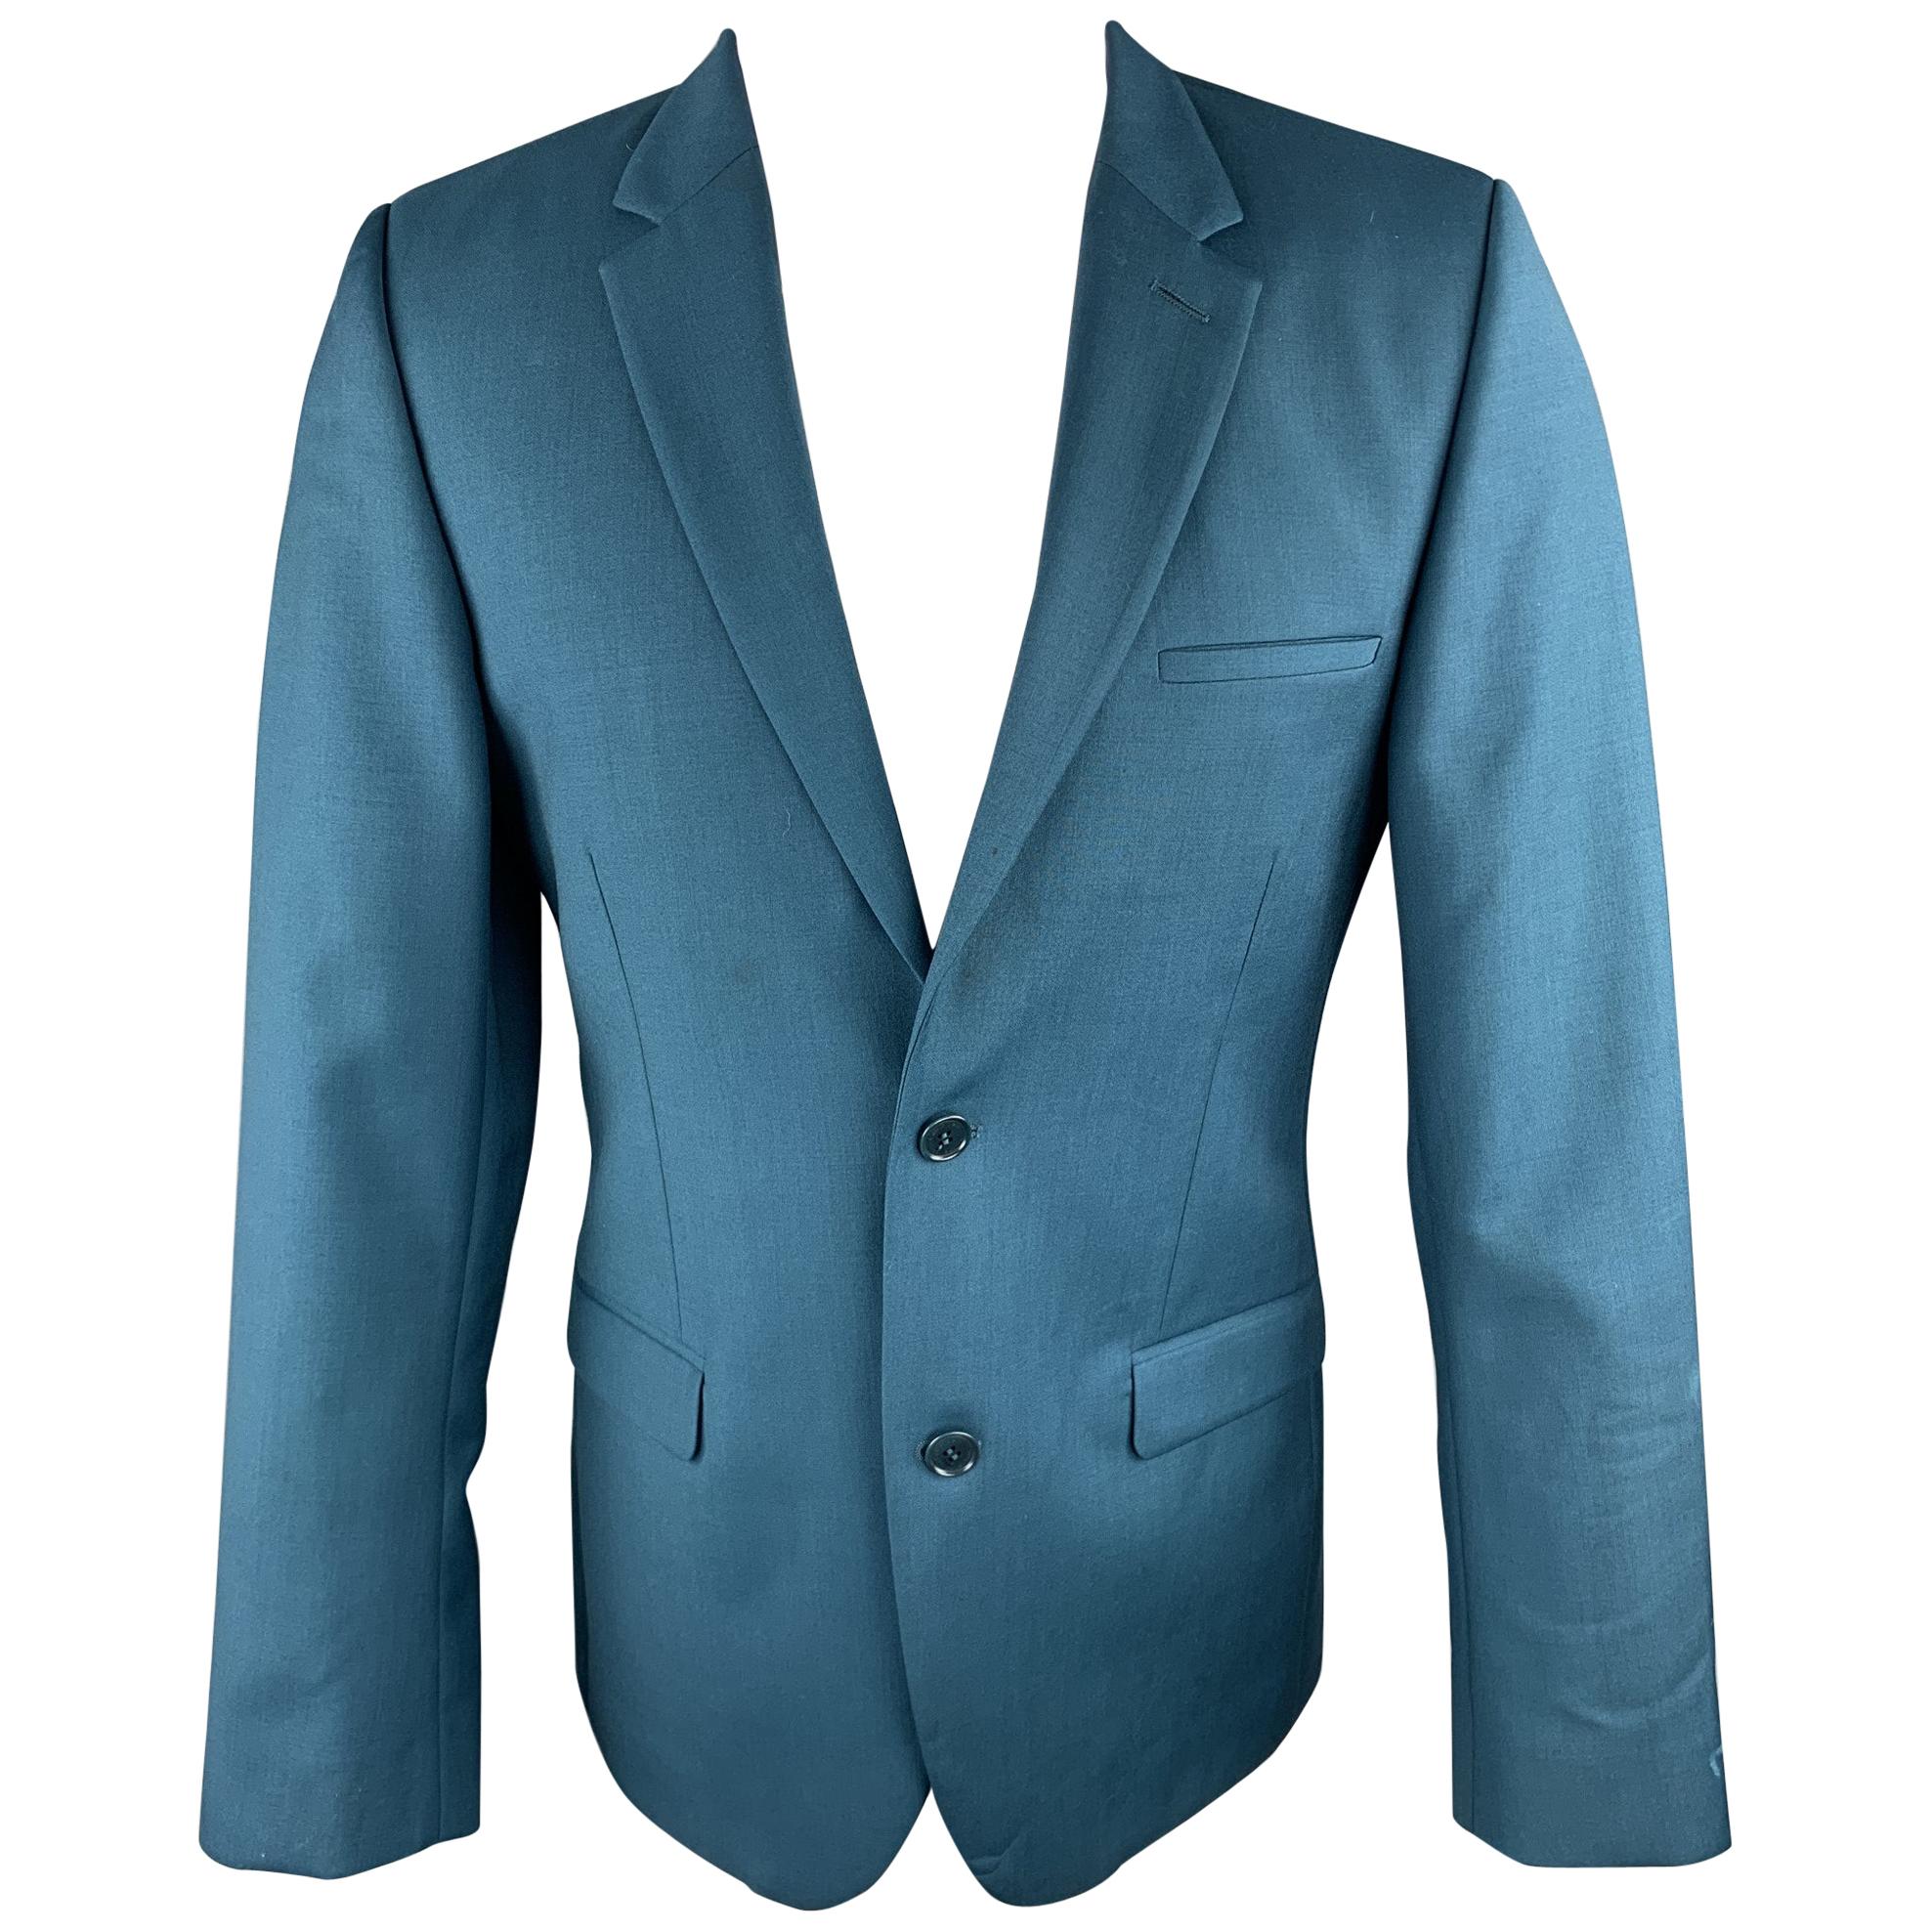 CALVIN KLEIN COLLECTION Size 38 Wool Notch Lapel Teal Sport Coat